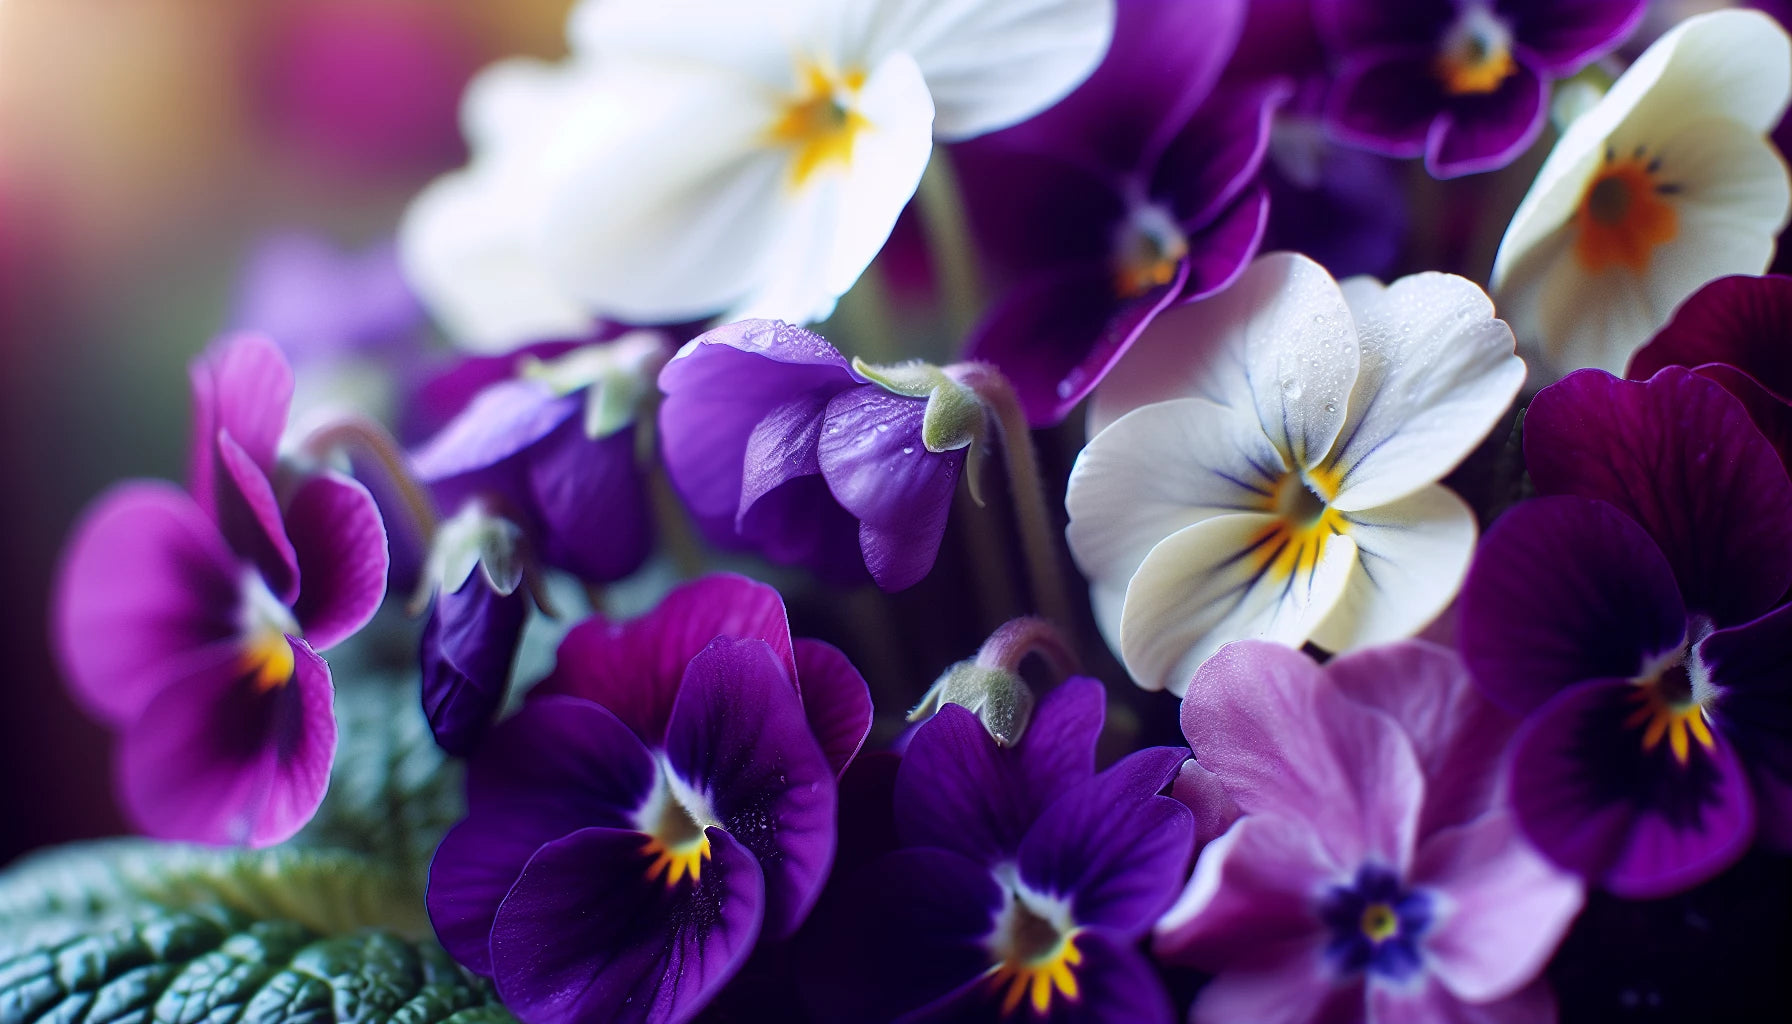 Assortment of violets and primroses in different hues